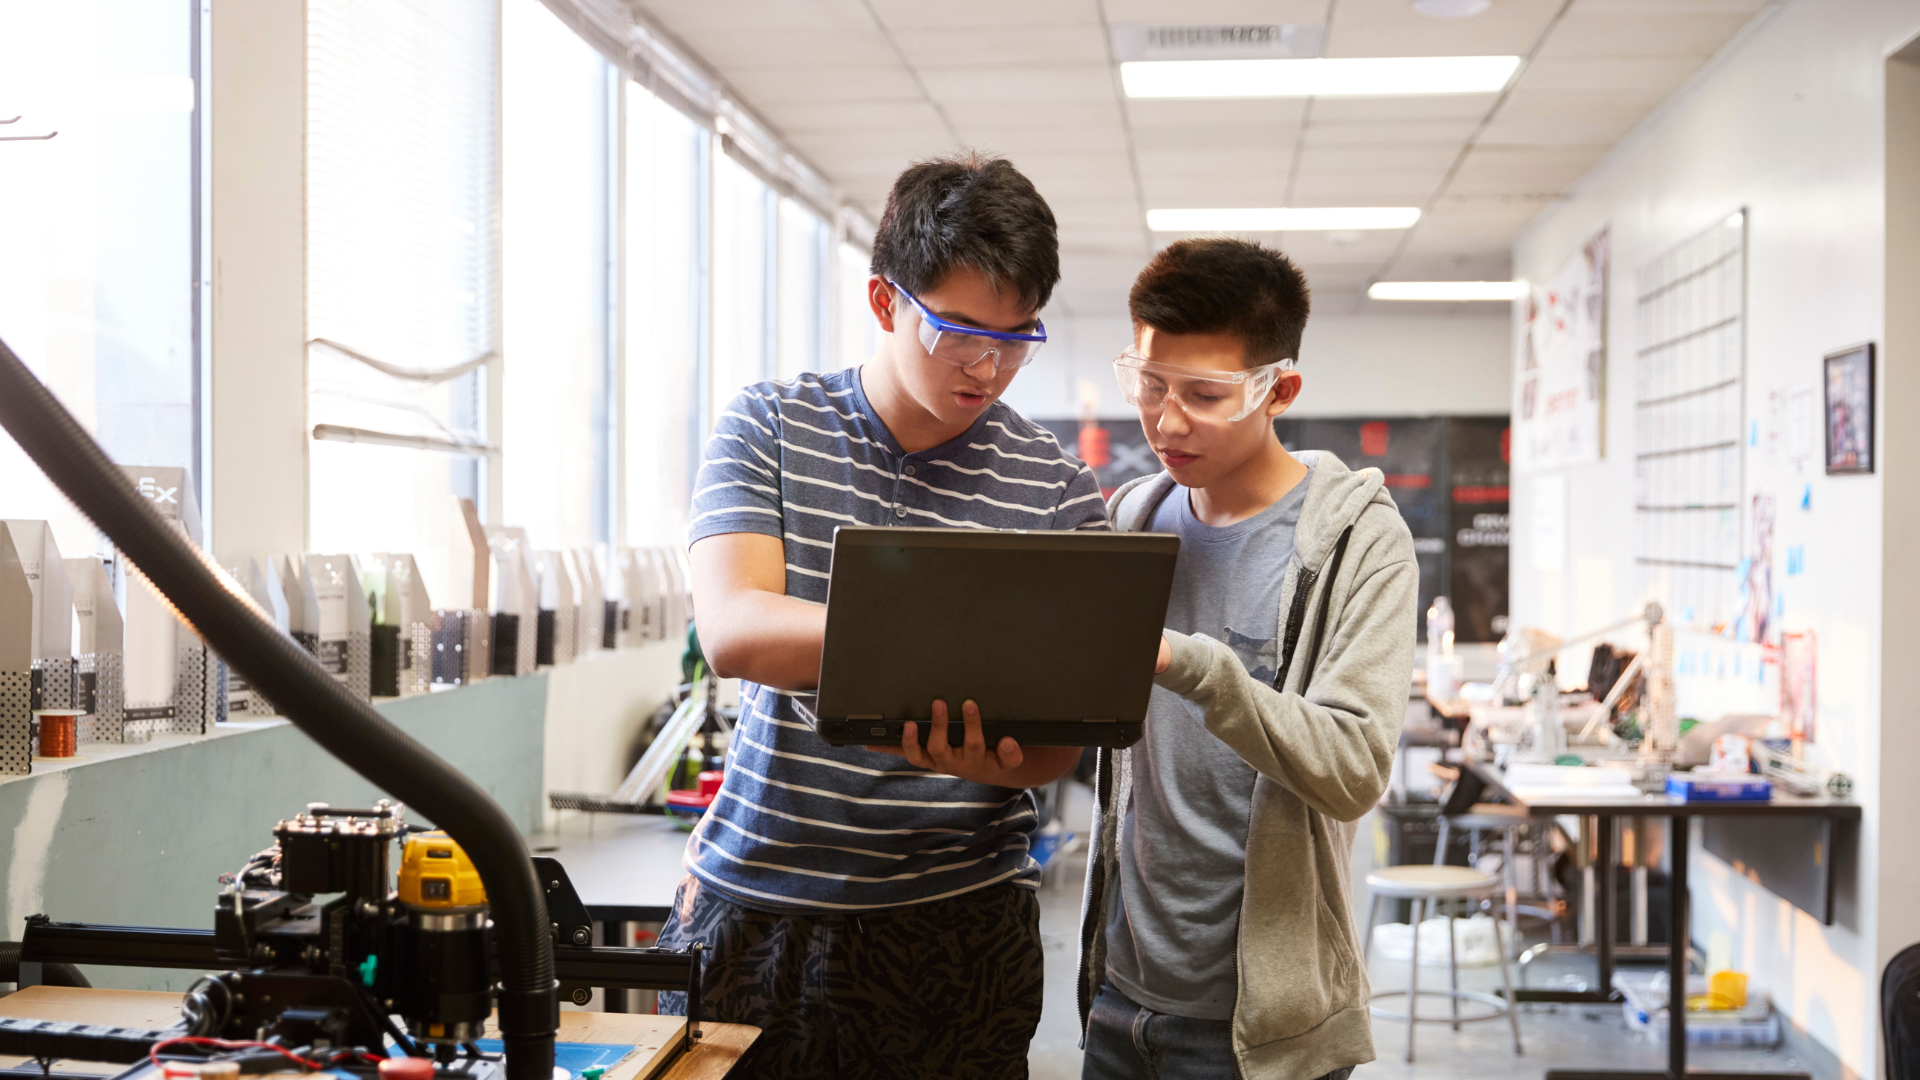 two students in a lab look at a laptop together